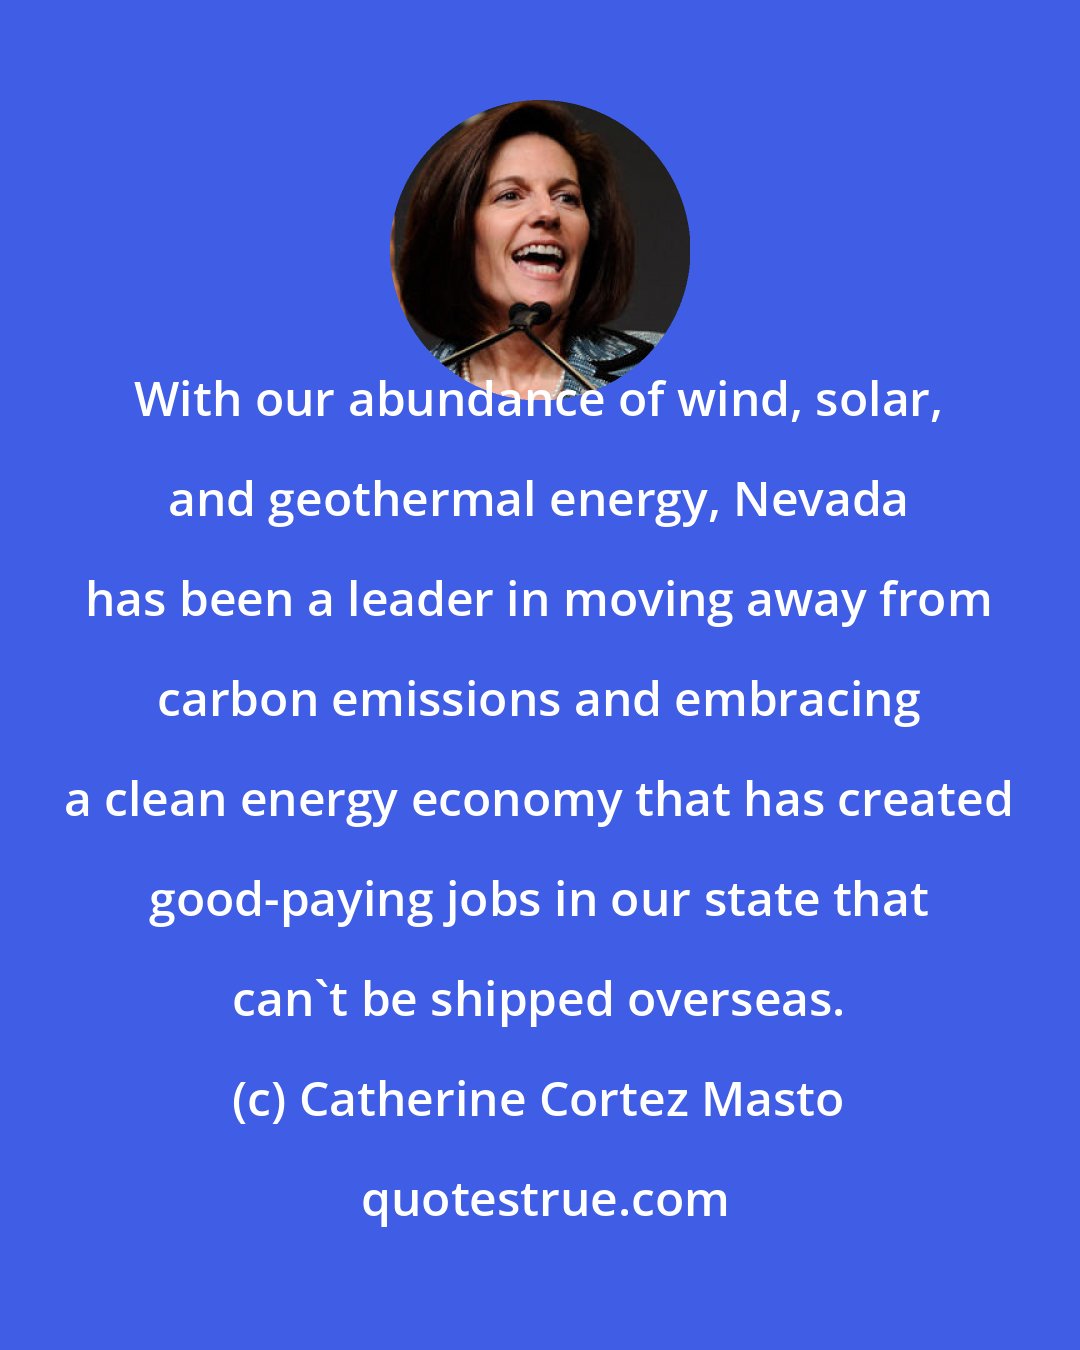 Catherine Cortez Masto: With our abundance of wind, solar, and geothermal energy, Nevada has been a leader in moving away from carbon emissions and embracing a clean energy economy that has created good-paying jobs in our state that can't be shipped overseas.